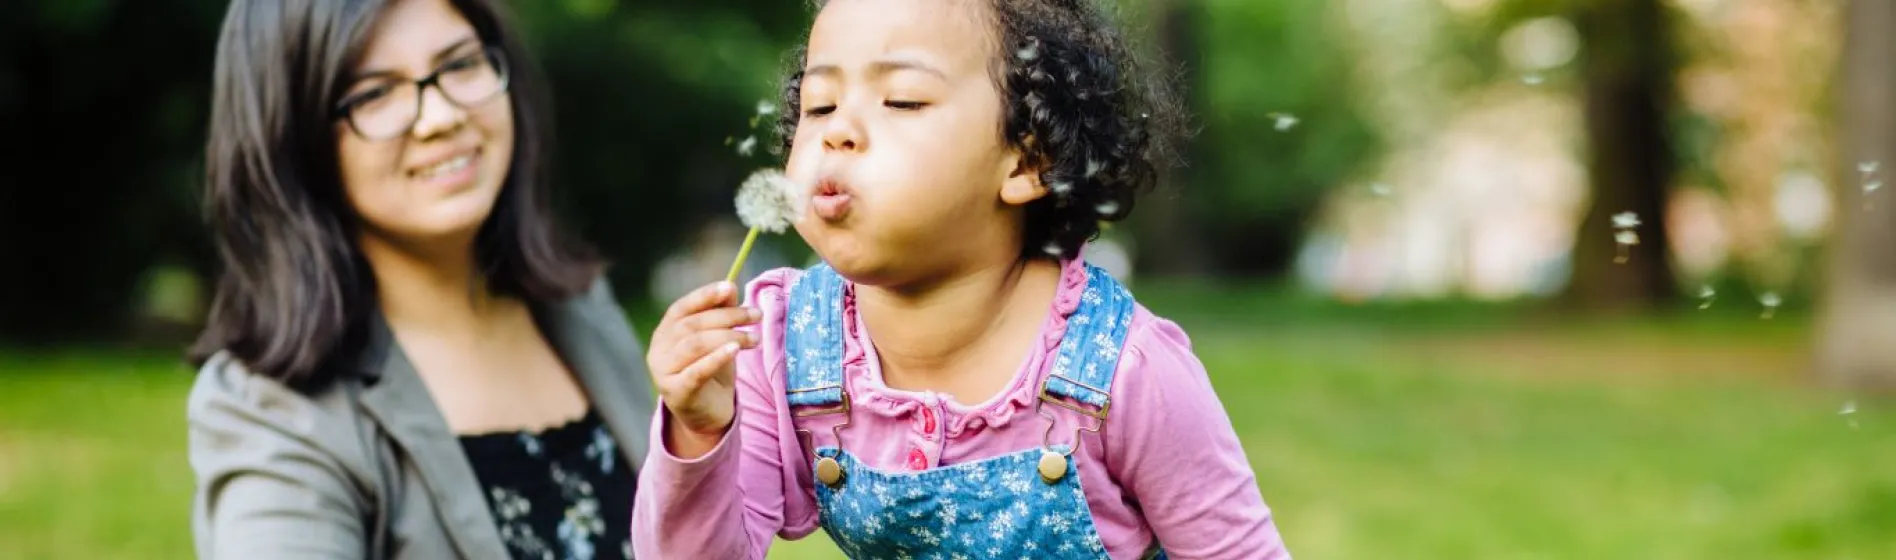 a young girl blows on a dandelion with her mother in the background